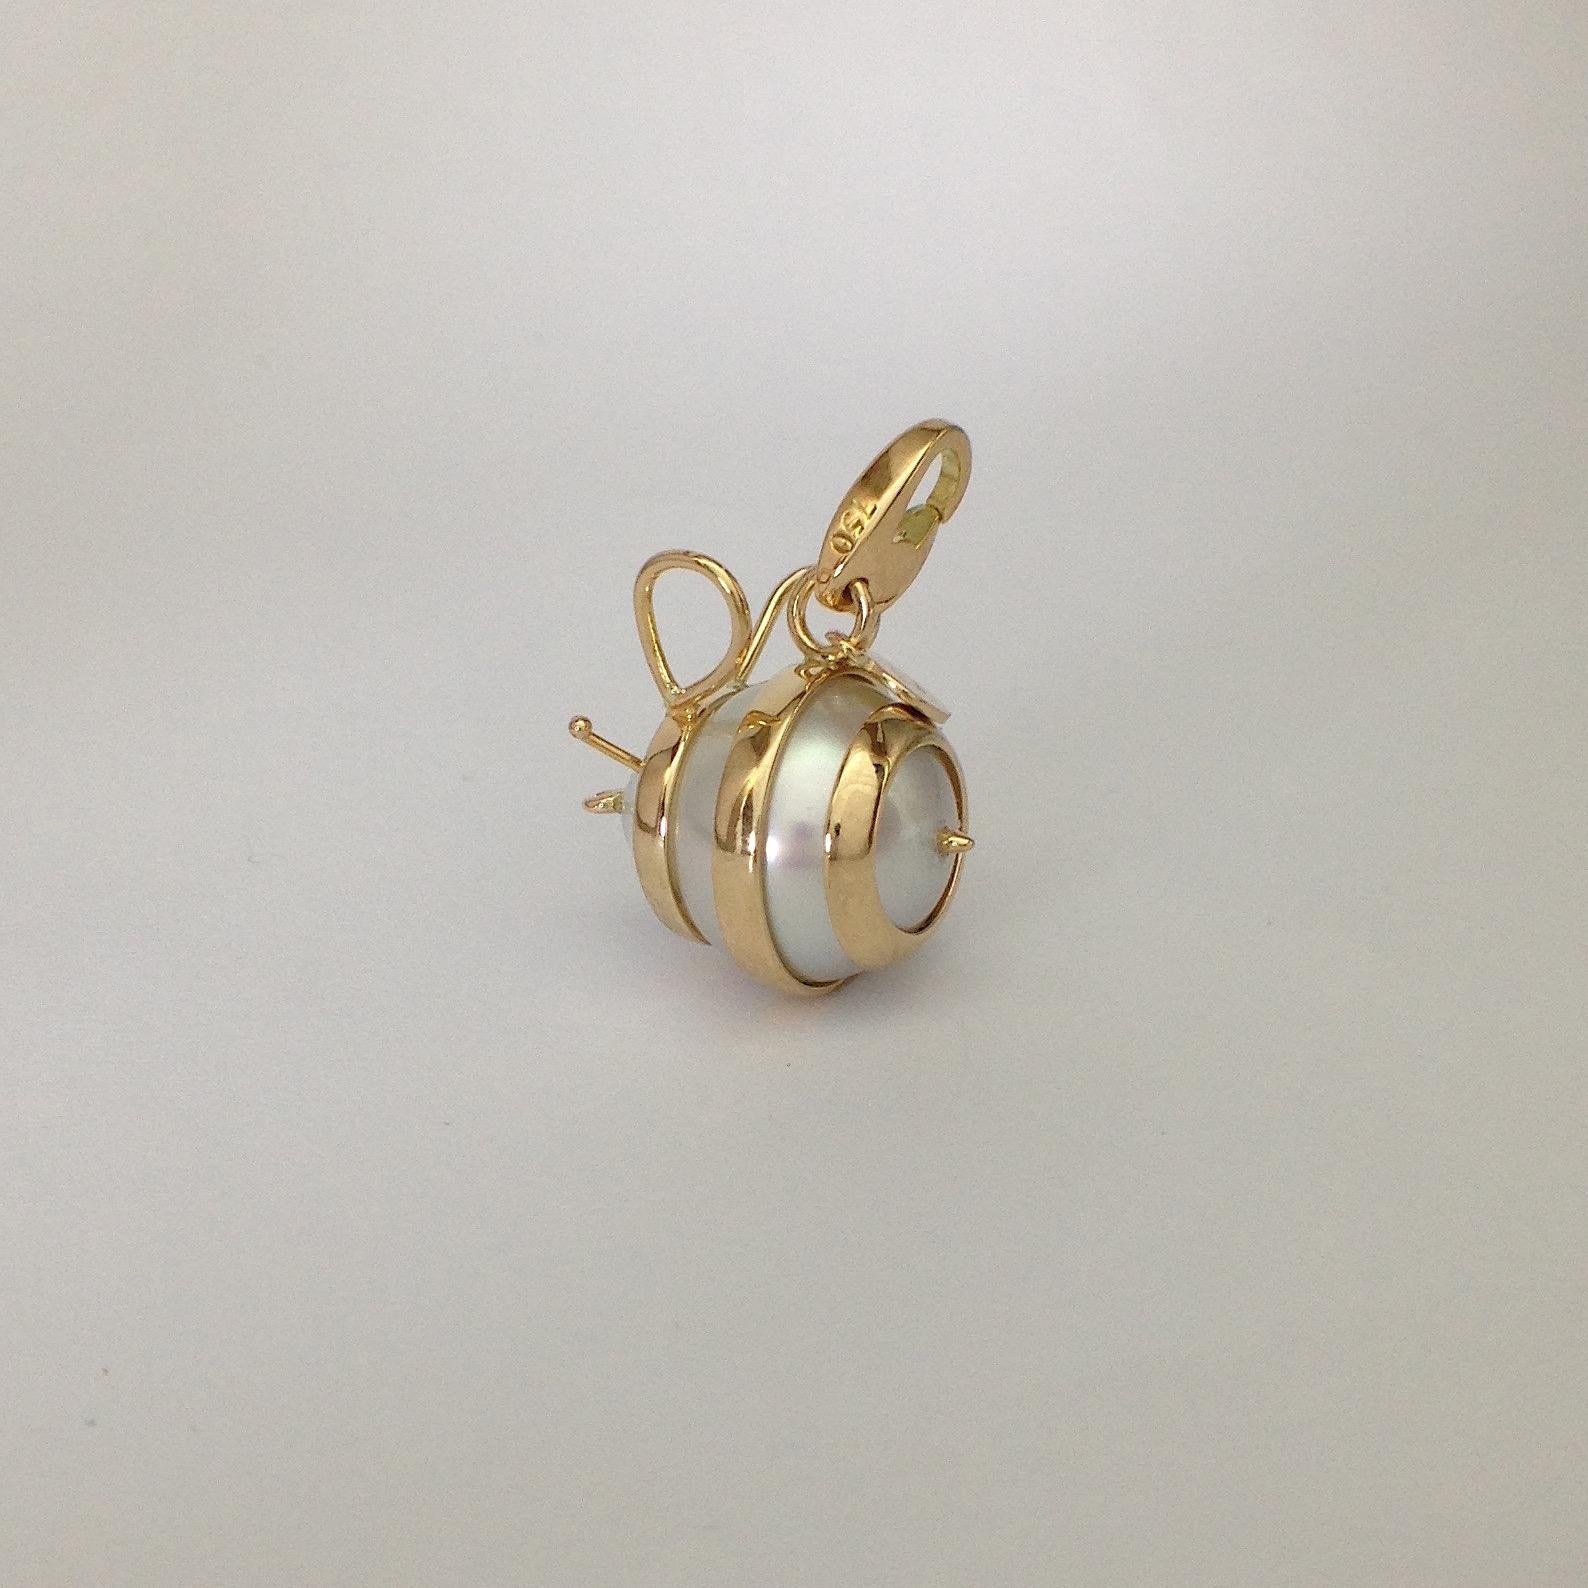 Contemporary Petronilla Bee 18 Kt Gold Australian Pearl Charm/ Pendant or Necklace Made in IT